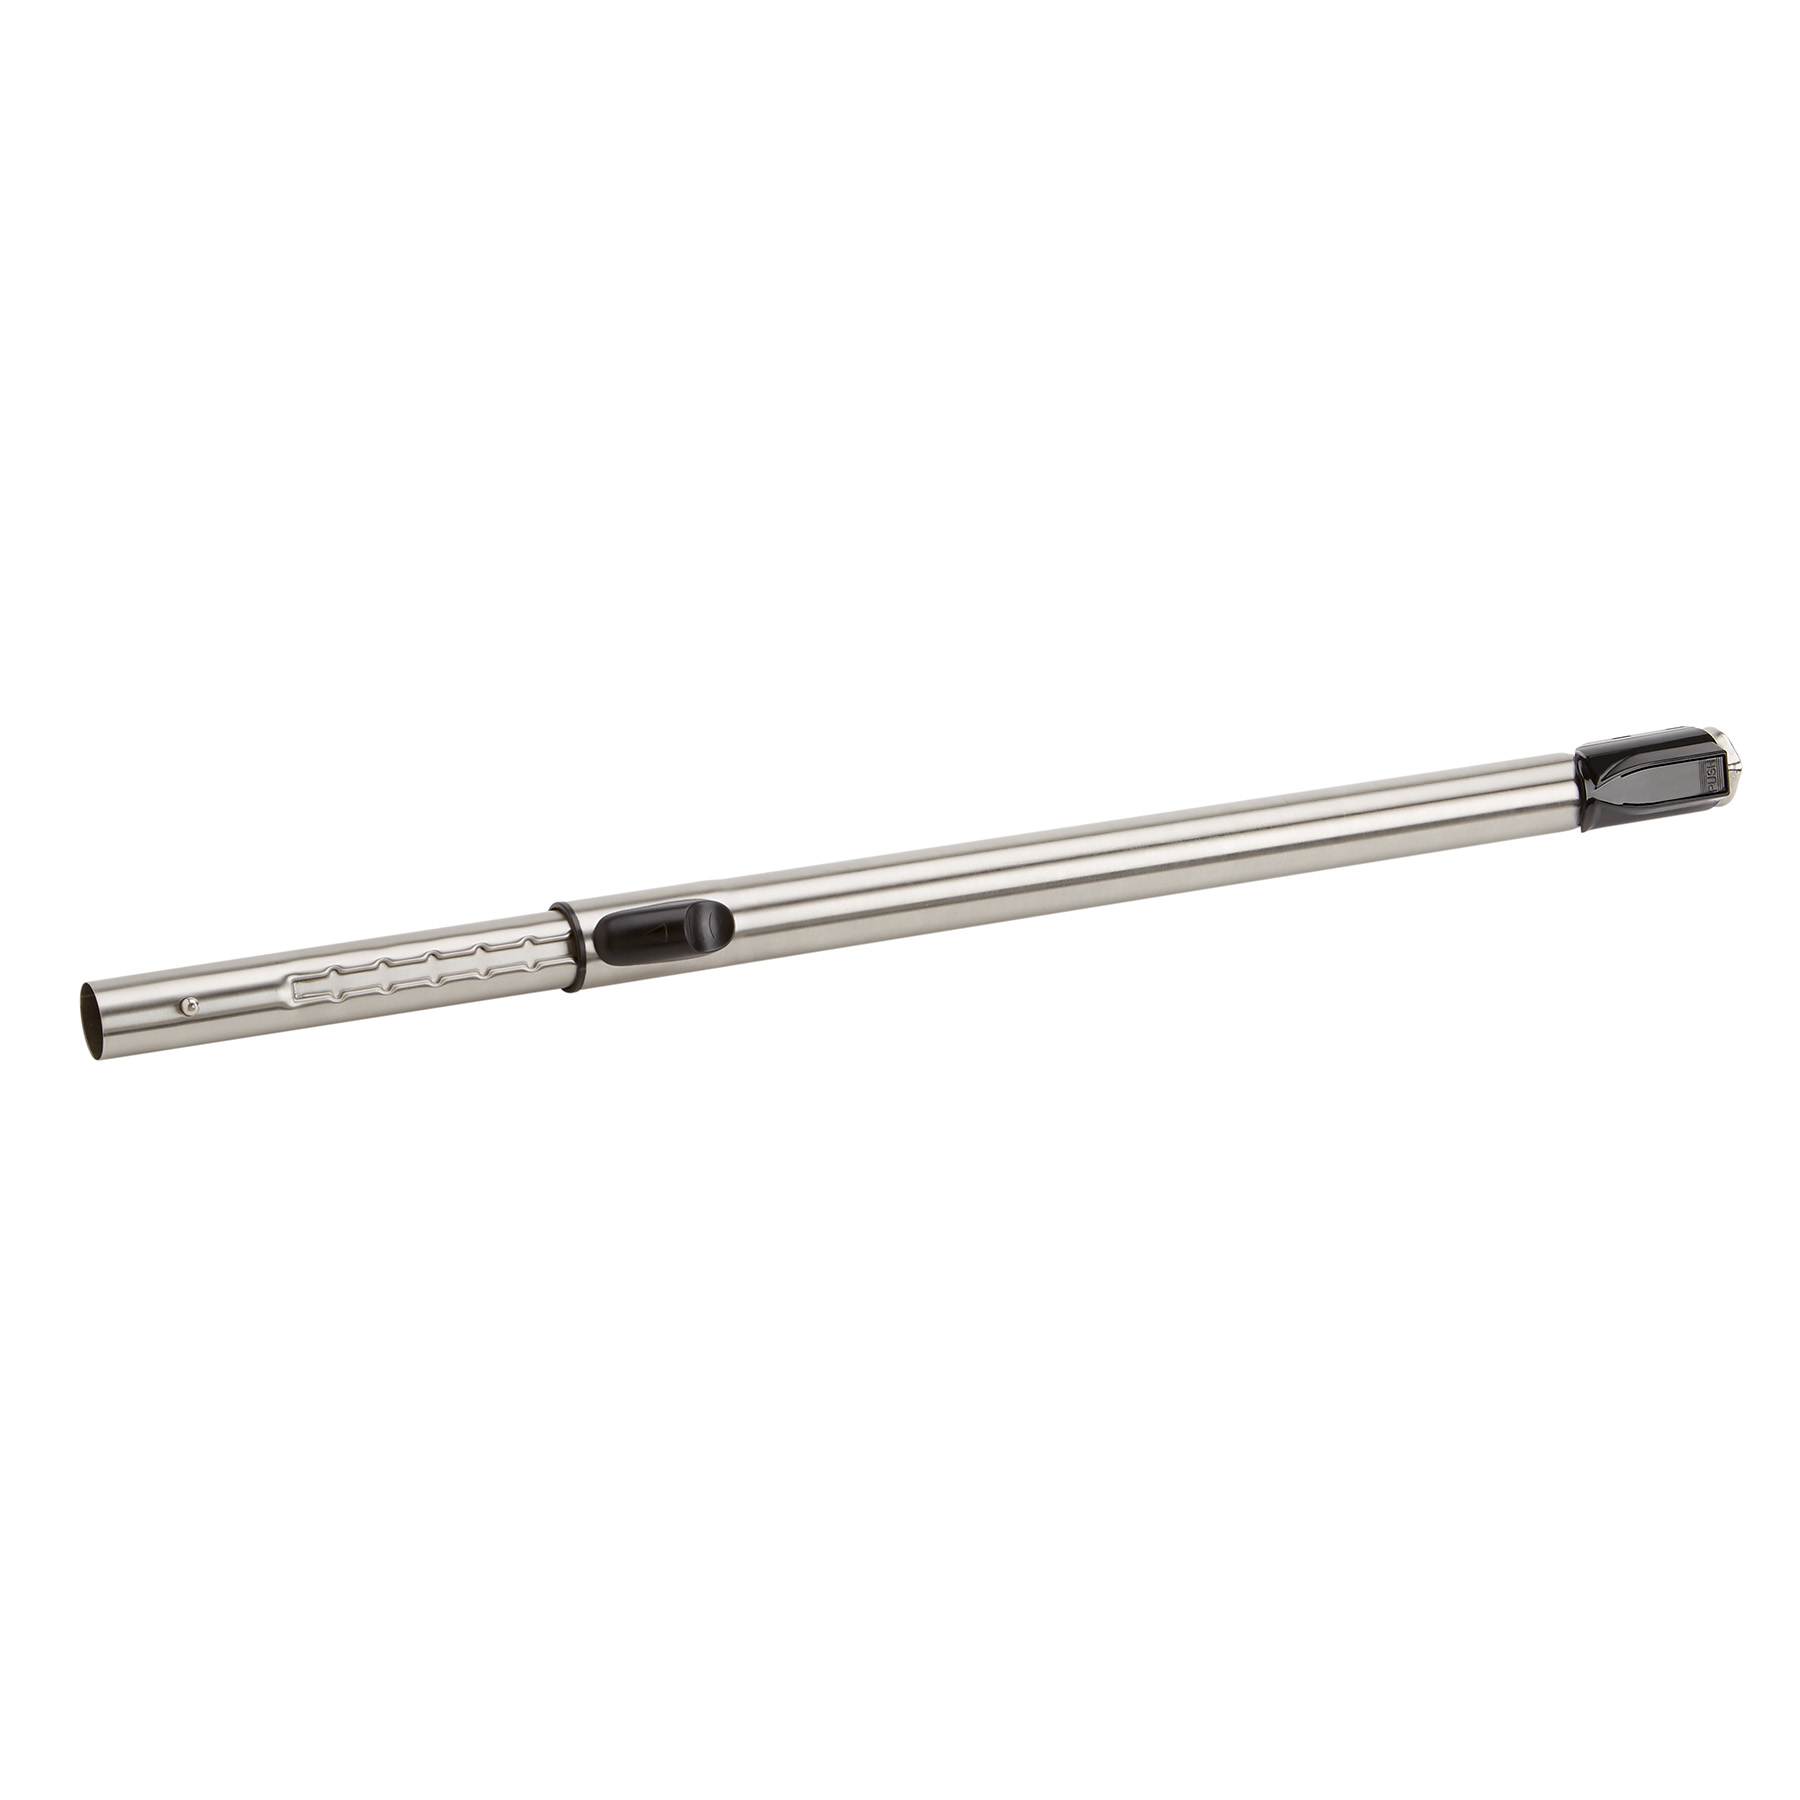 Ratcheting Wand for Central Vacuums, Adjustable Length, with Plated Chrome Finish